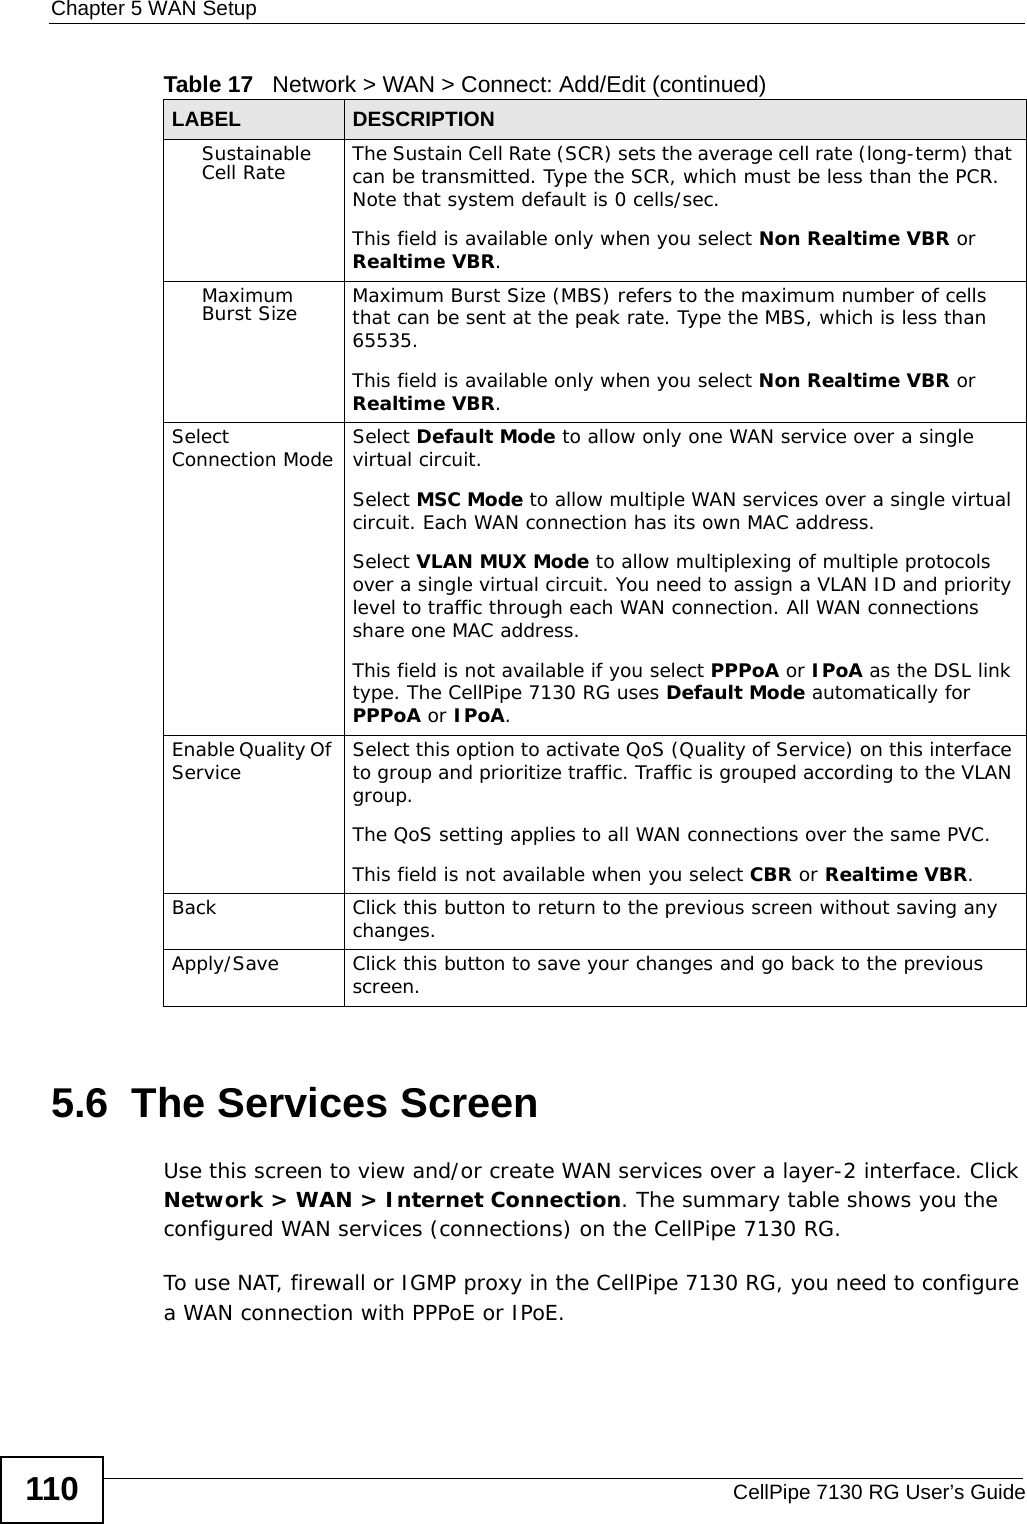 Chapter 5 WAN SetupCellPipe 7130 RG User’s Guide1105.6  The Services Screen Use this screen to view and/or create WAN services over a layer-2 interface. Click Network &gt; WAN &gt; Internet Connection. The summary table shows you the configured WAN services (connections) on the CellPipe 7130 RG. To use NAT, firewall or IGMP proxy in the CellPipe 7130 RG, you need to configure a WAN connection with PPPoE or IPoE.Sustainable Cell Rate The Sustain Cell Rate (SCR) sets the average cell rate (long-term) that can be transmitted. Type the SCR, which must be less than the PCR. Note that system default is 0 cells/sec. This field is available only when you select Non Realtime VBR or Realtime VBR.Maximum Burst Size Maximum Burst Size (MBS) refers to the maximum number of cells that can be sent at the peak rate. Type the MBS, which is less than 65535. This field is available only when you select Non Realtime VBR or Realtime VBR.Select Connection Mode Select Default Mode to allow only one WAN service over a single virtual circuit.Select MSC Mode to allow multiple WAN services over a single virtual circuit. Each WAN connection has its own MAC address.Select VLAN MUX Mode to allow multiplexing of multiple protocols over a single virtual circuit. You need to assign a VLAN ID and priority level to traffic through each WAN connection. All WAN connections share one MAC address.This field is not available if you select PPPoA or IPoA as the DSL link type. The CellPipe 7130 RG uses Default Mode automatically for PPPoA or IPoA.Enable Quality Of Service Select this option to activate QoS (Quality of Service) on this interface to group and prioritize traffic. Traffic is grouped according to the VLAN group.The QoS setting applies to all WAN connections over the same PVC.This field is not available when you select CBR or Realtime VBR.Back Click this button to return to the previous screen without saving any changes.Apply/Save Click this button to save your changes and go back to the previous screen.Table 17   Network &gt; WAN &gt; Connect: Add/Edit (continued)LABEL DESCRIPTION